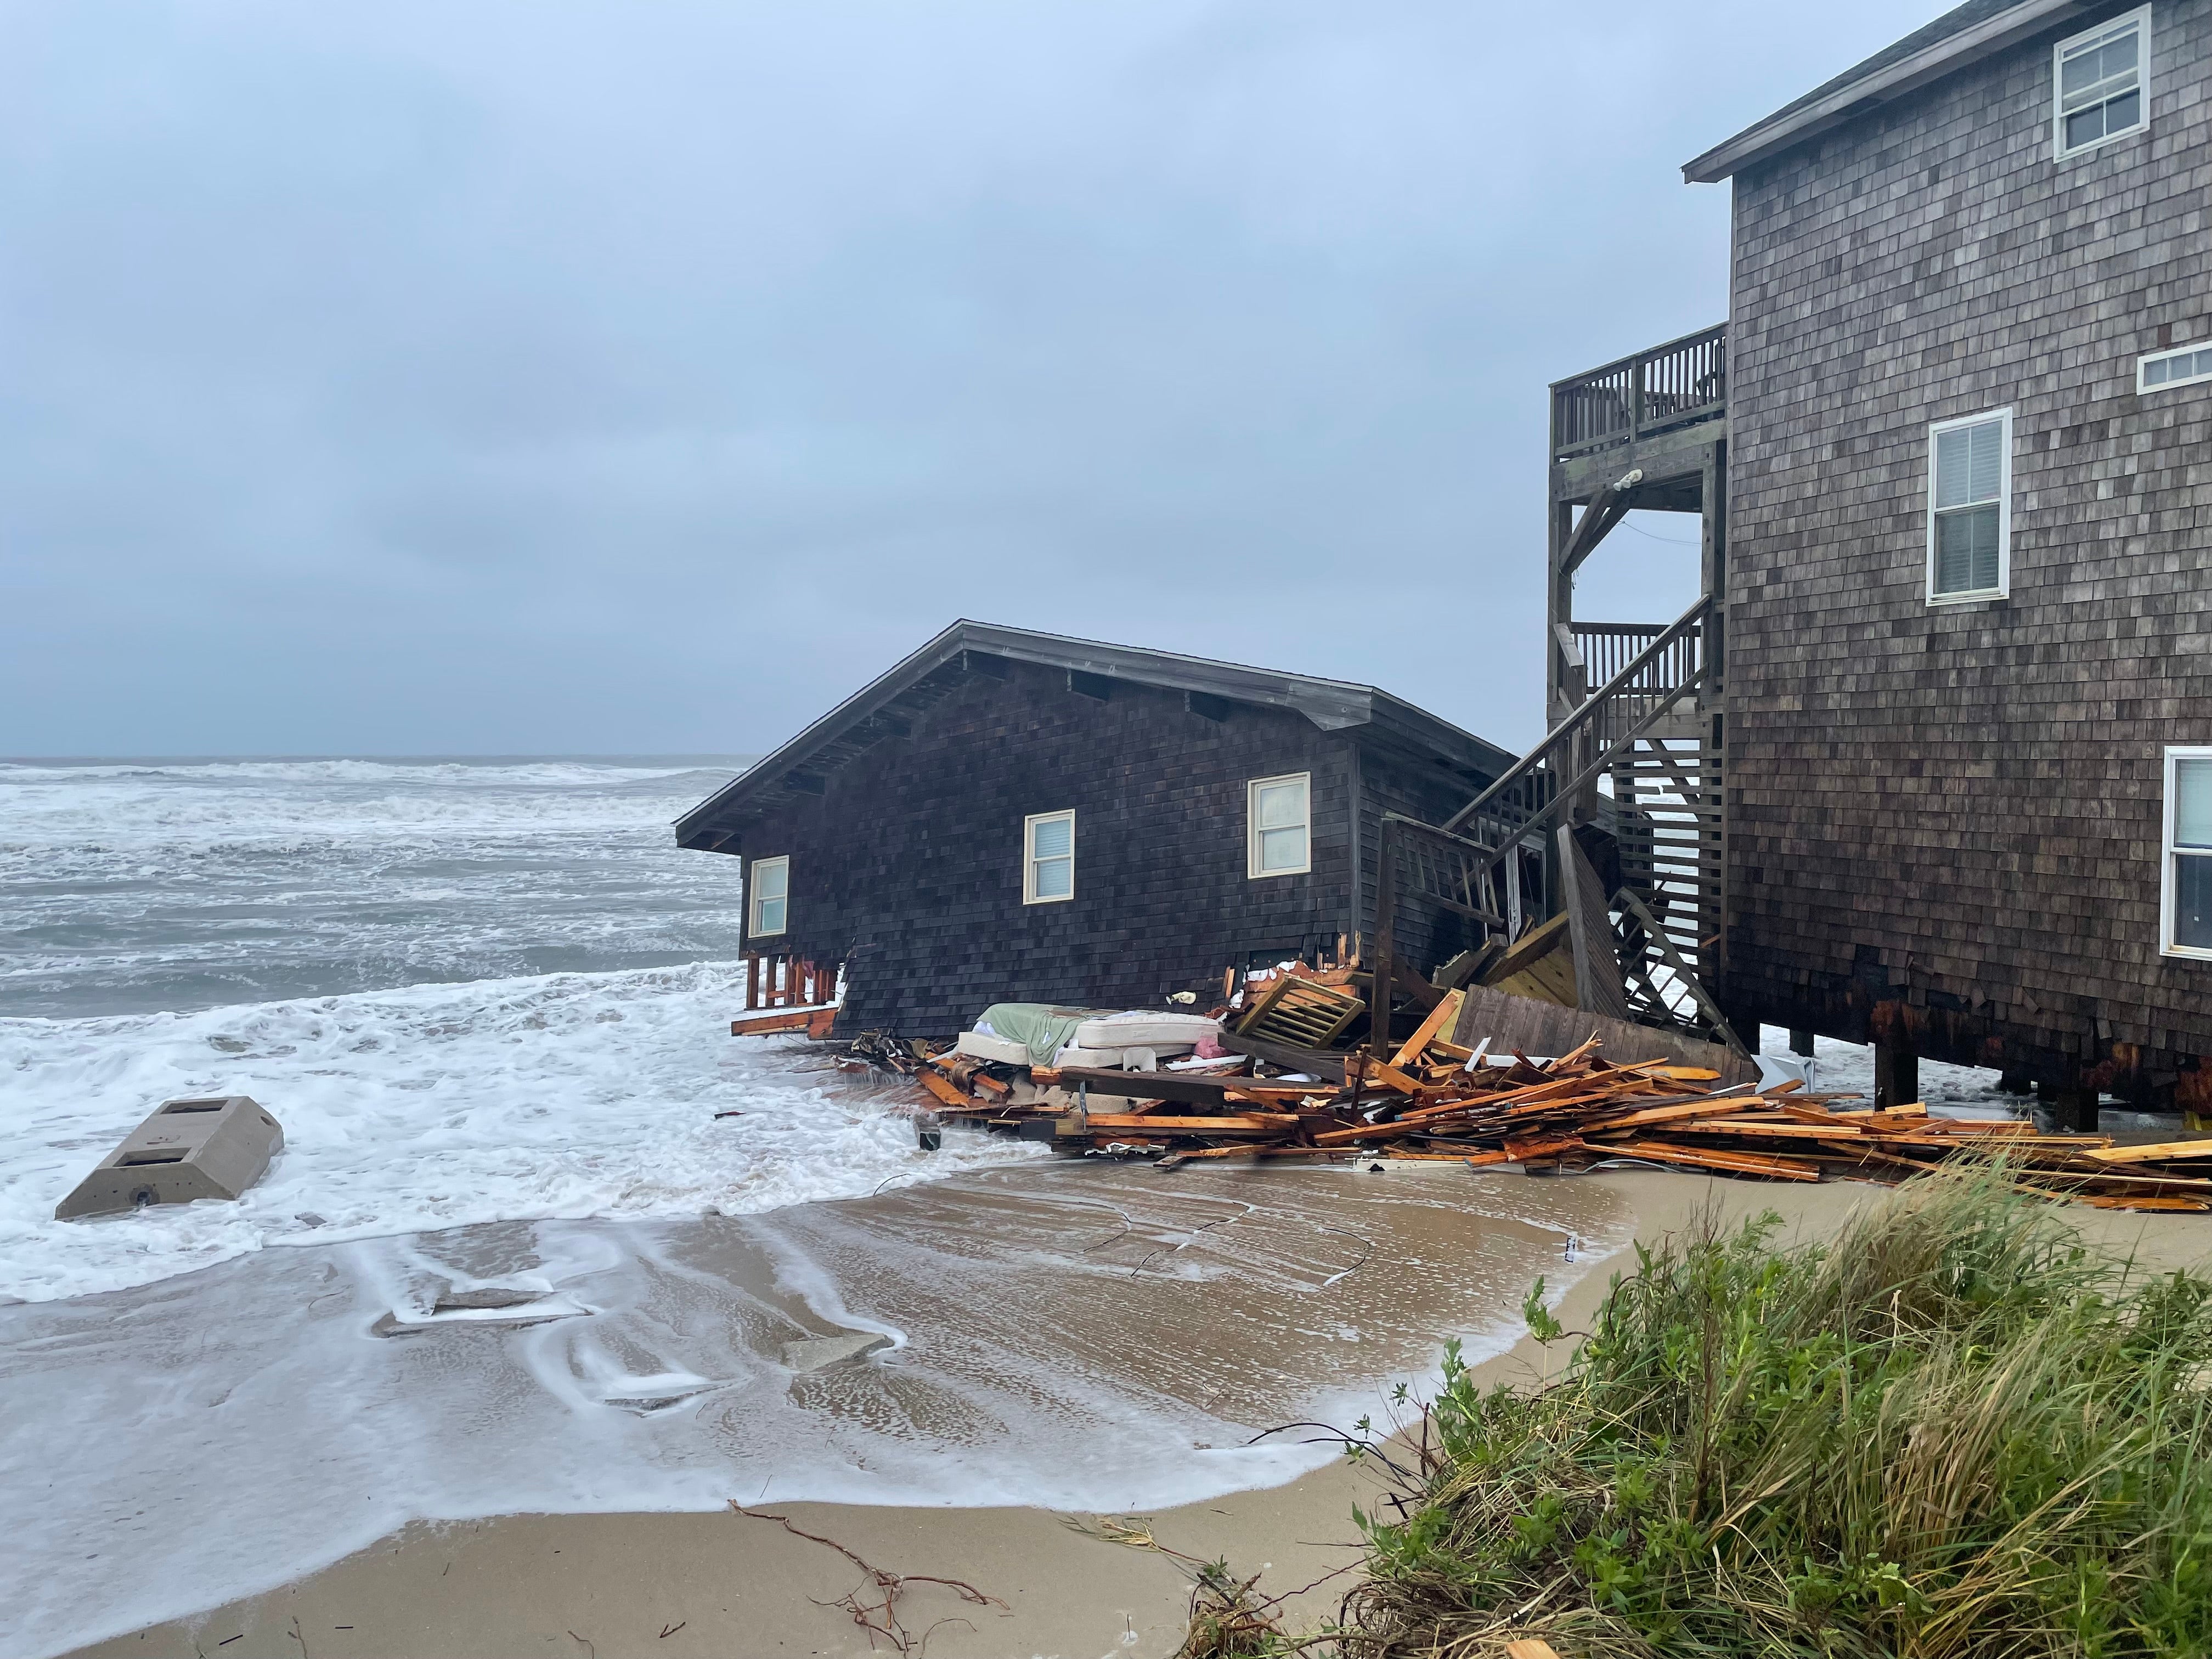 This unoccupied house collapsed sometime in the morning on May 10, falling into the rising tide. (Photo: Cape Hatteras NPS / National Park Service, Fair Use)